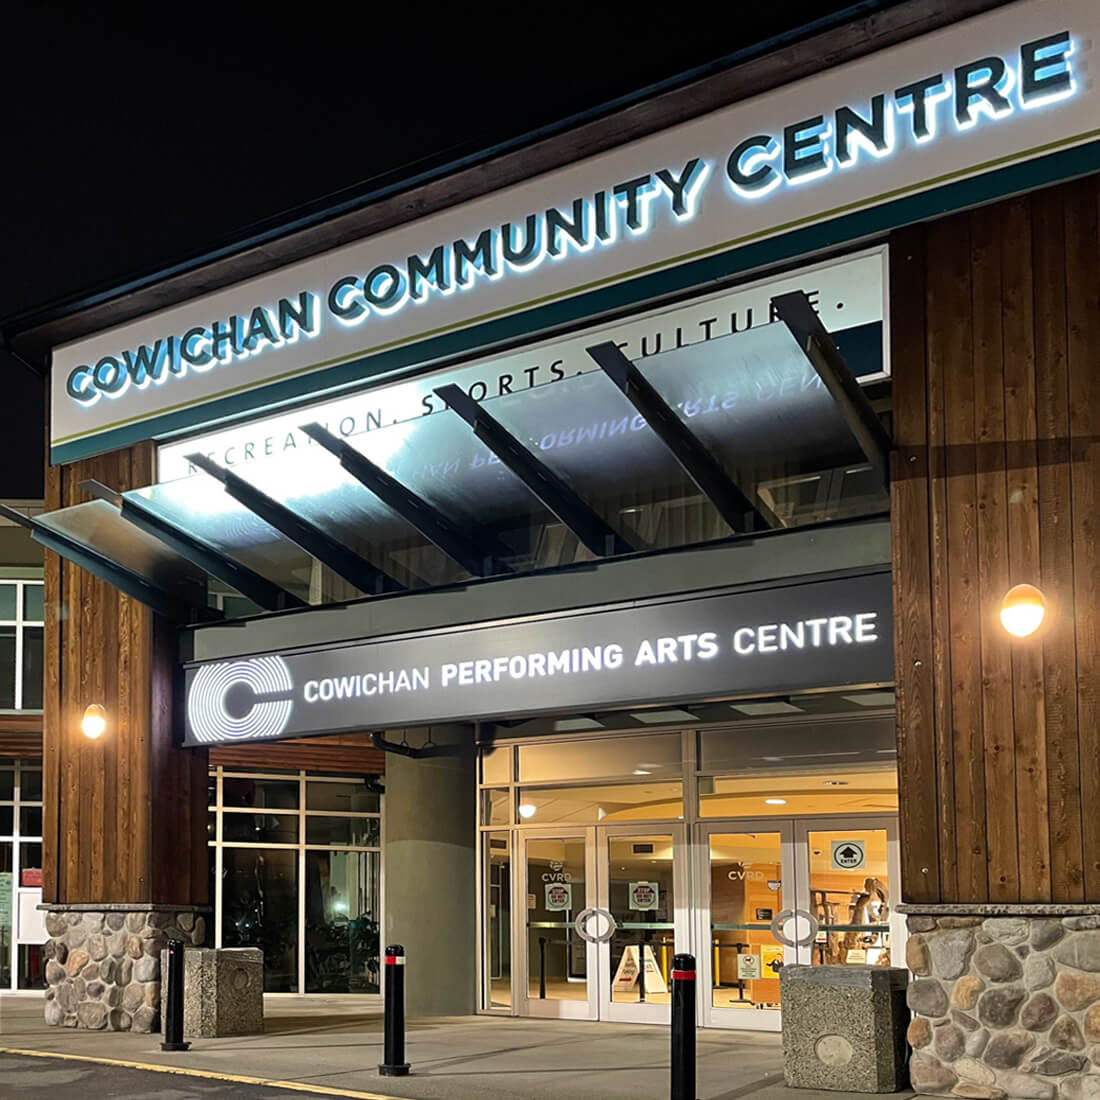 Location map for Cowichan Performing Arts Centre